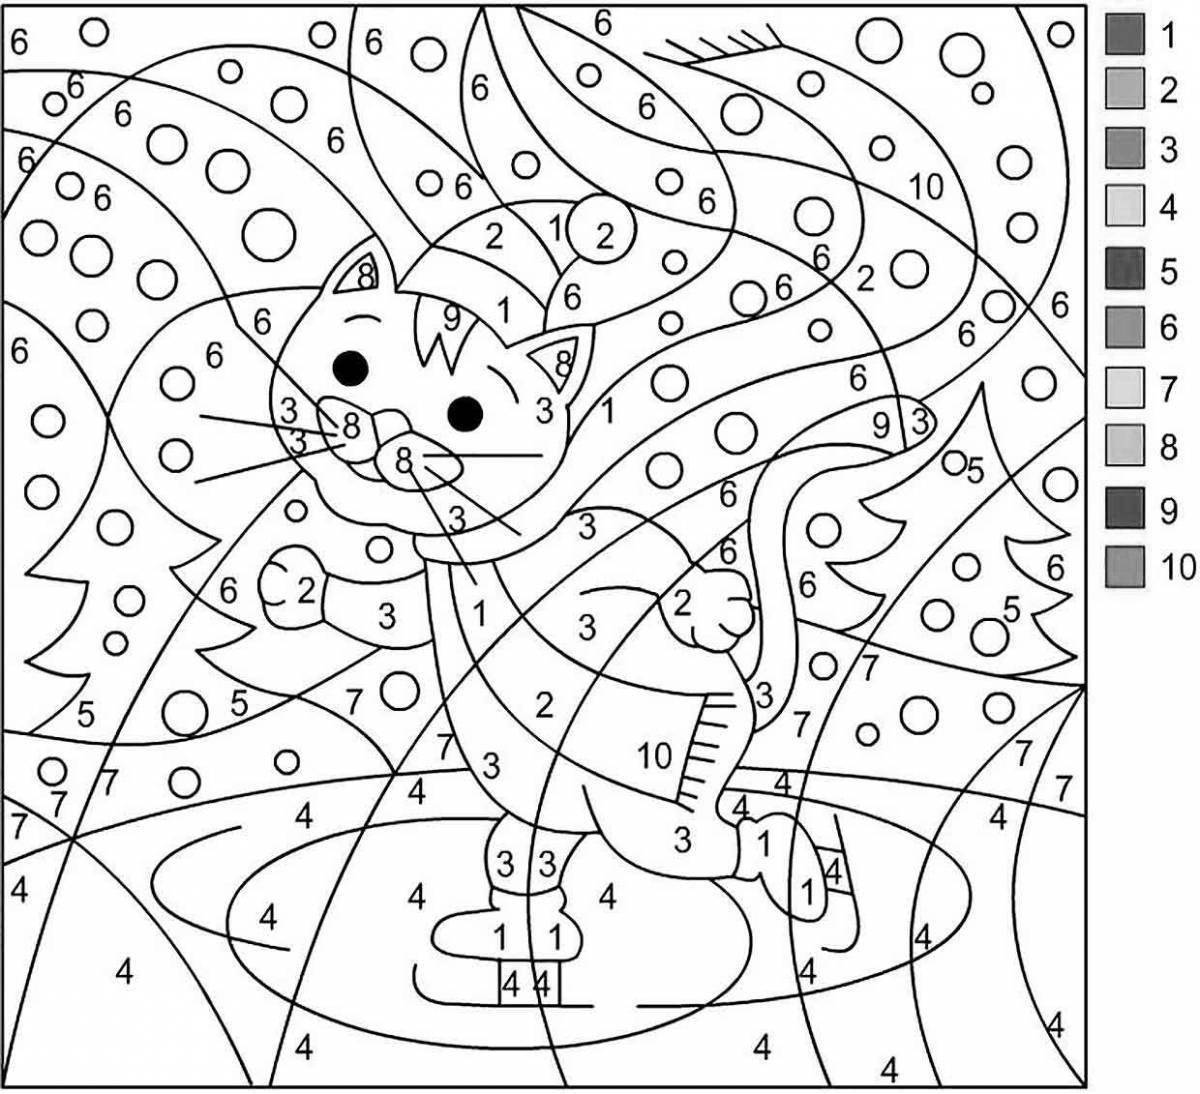 A fascinating coloring book download